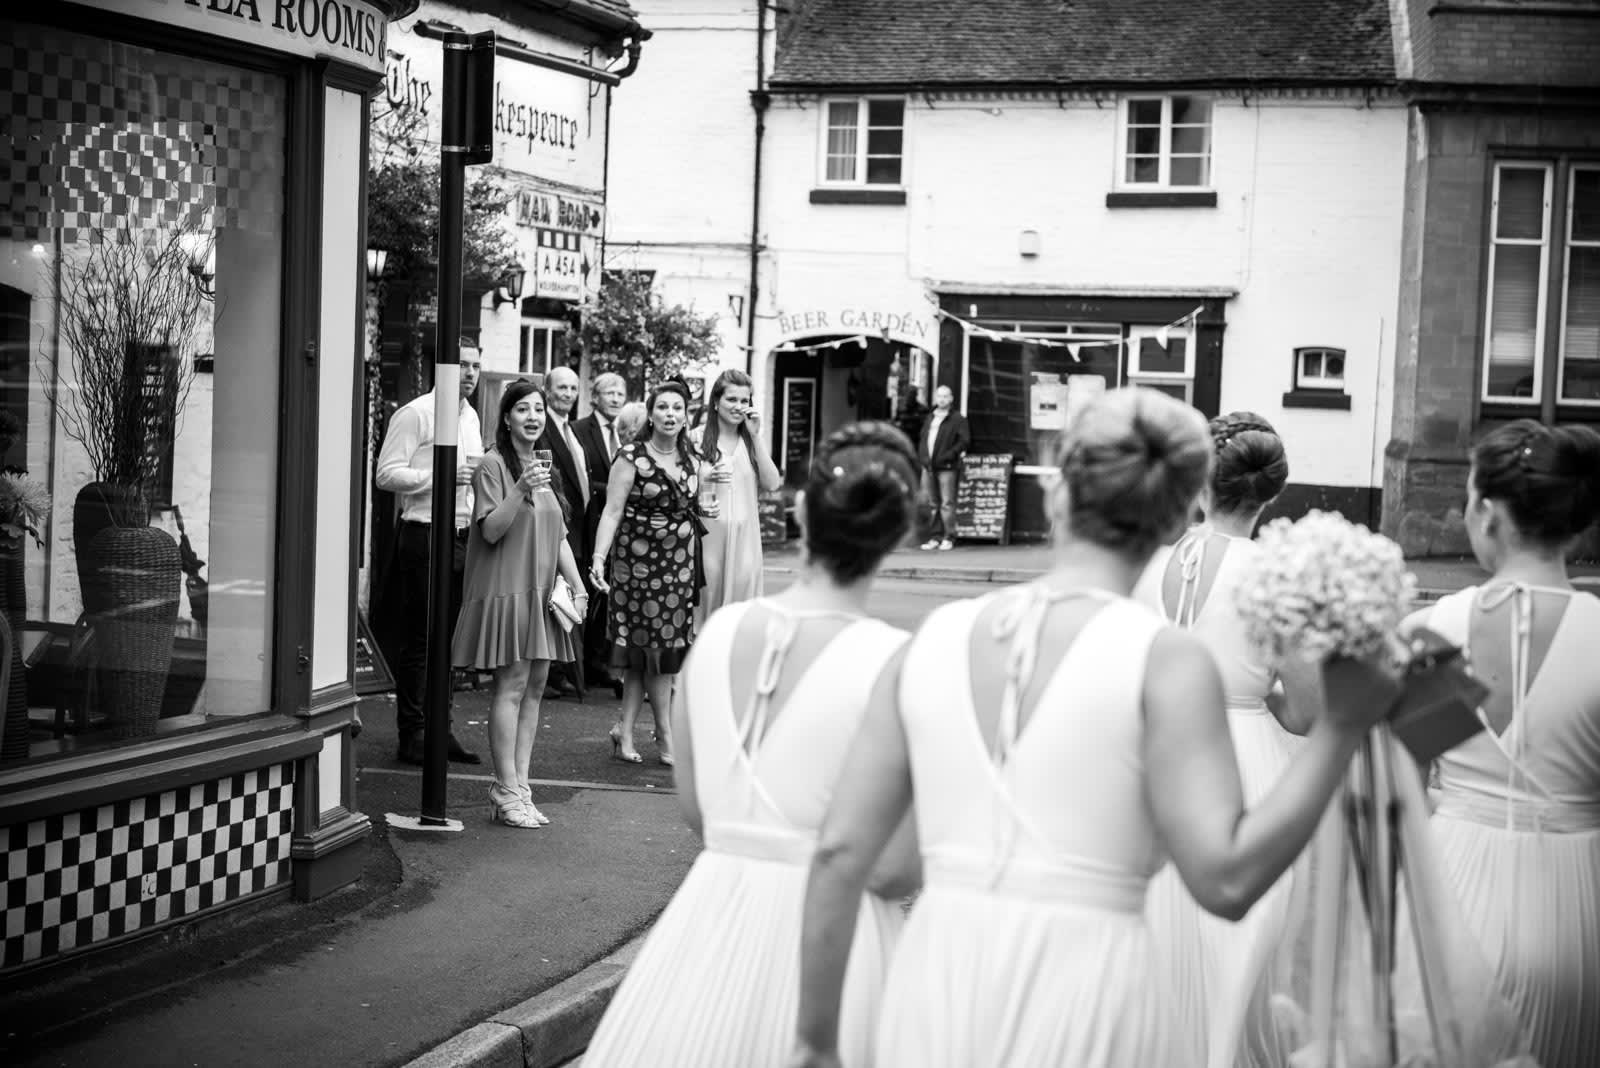 Real wedding of Alice and Brad in Bridgnorth, featured on Bridebook.co.uk.  Photo by: Nick Brightman Photography